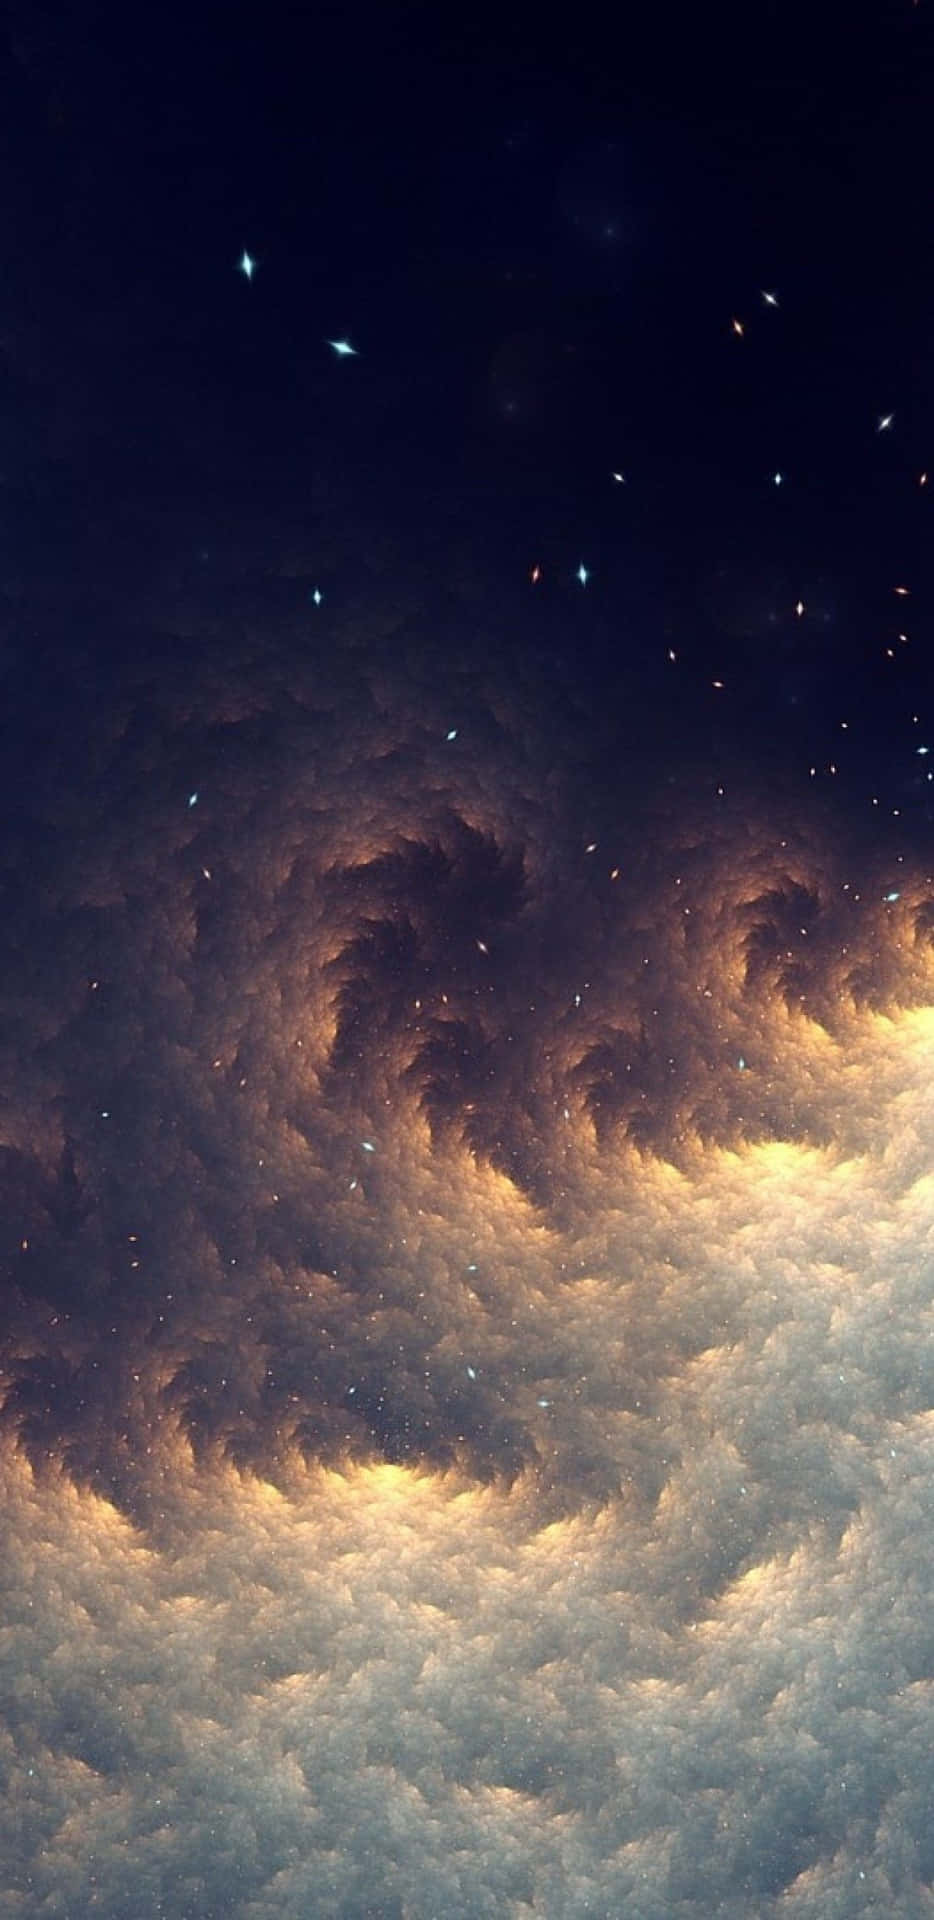 A Cloudy Sky With Stars And Clouds